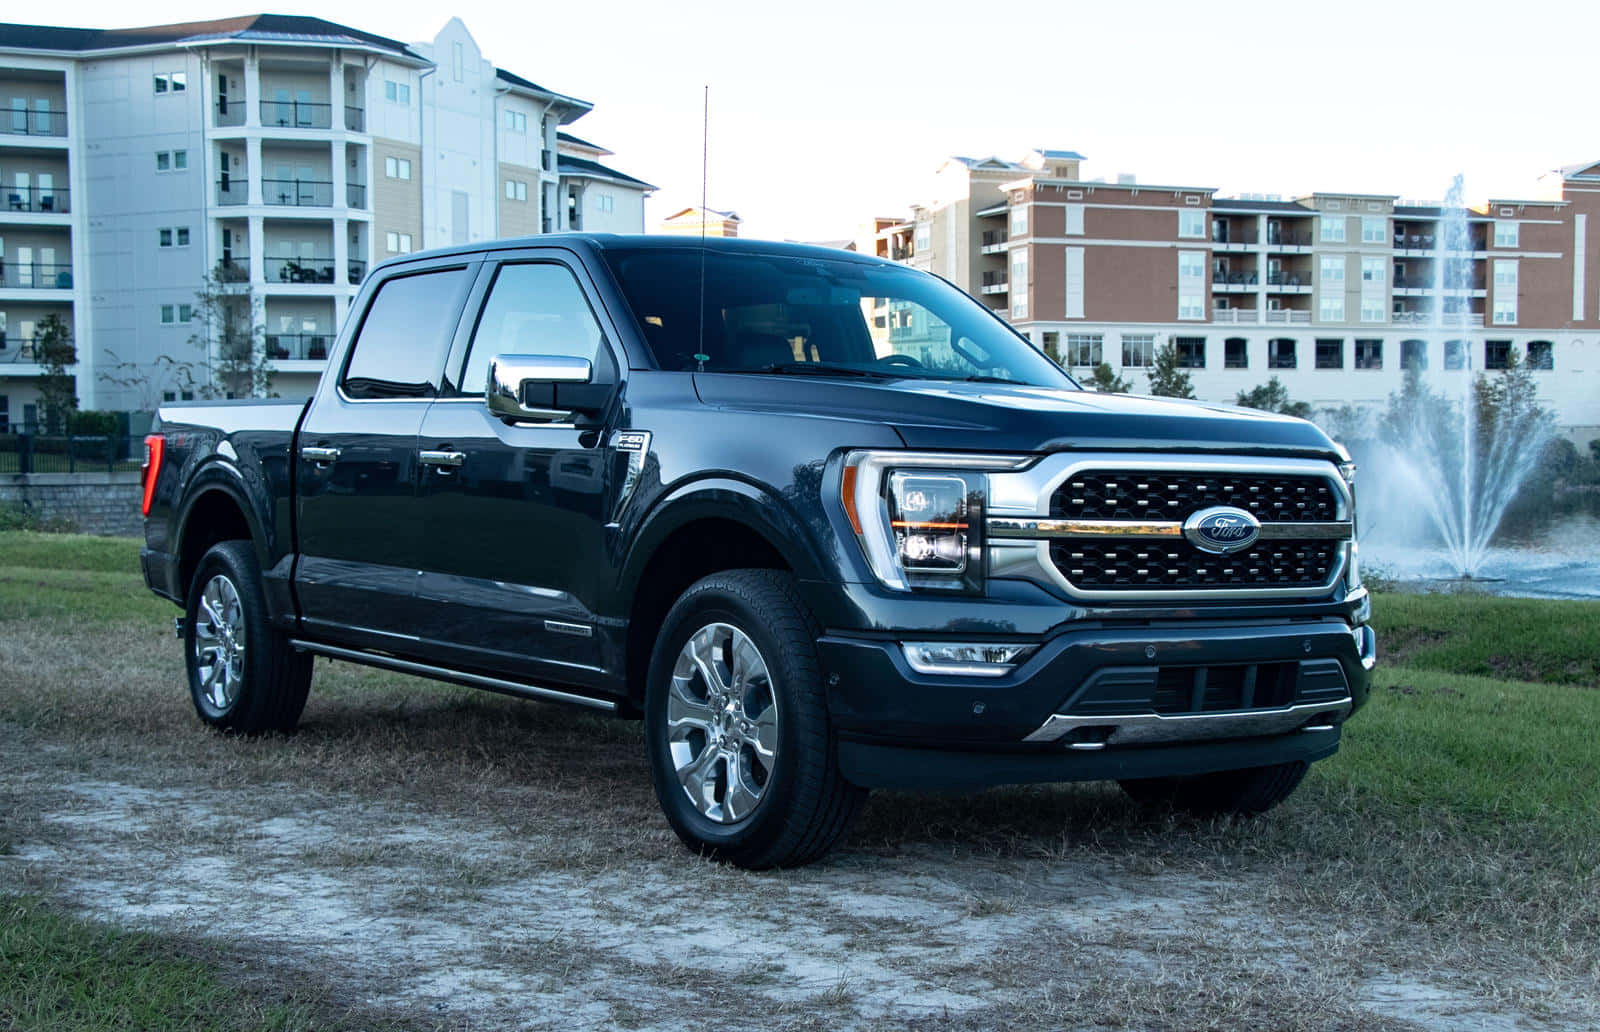 The Ultimate Workhorse - The Ford F 150 Wallpaper